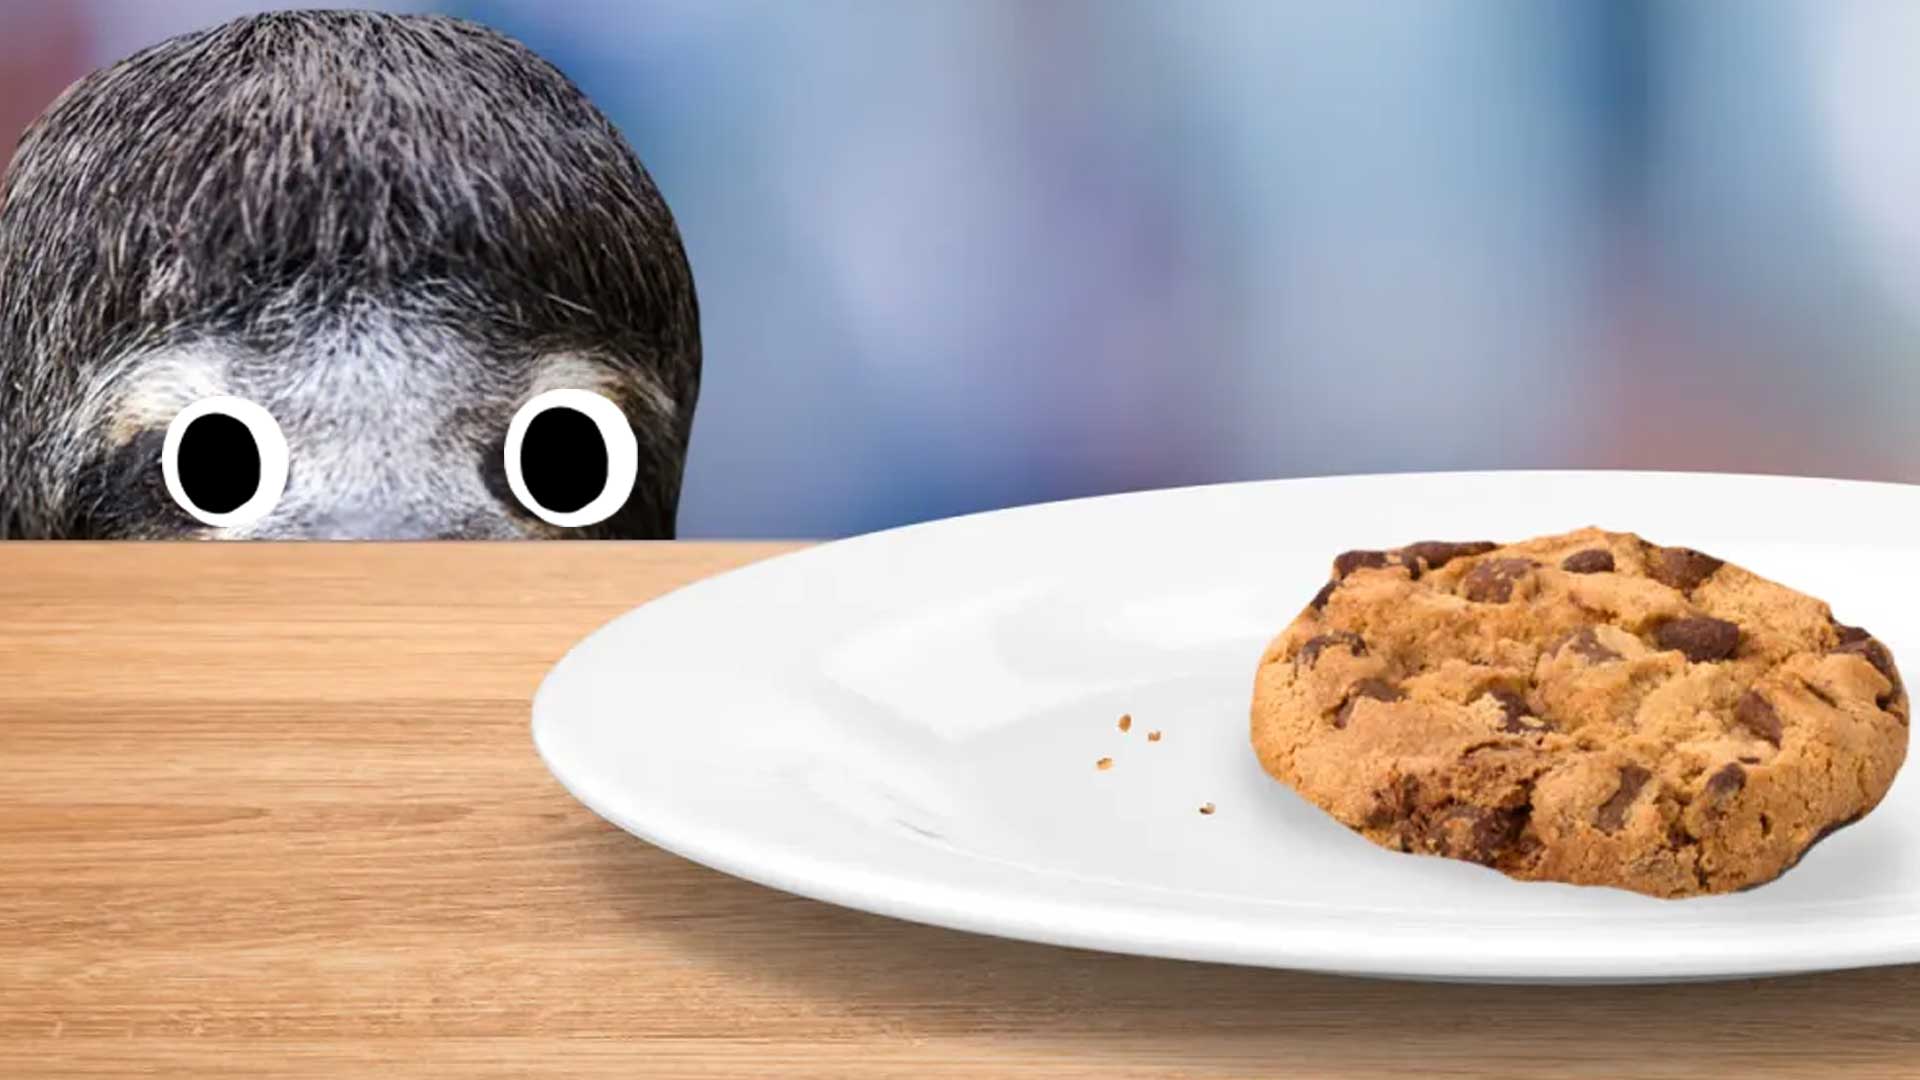 A sloth looks at a biscuit on a plate